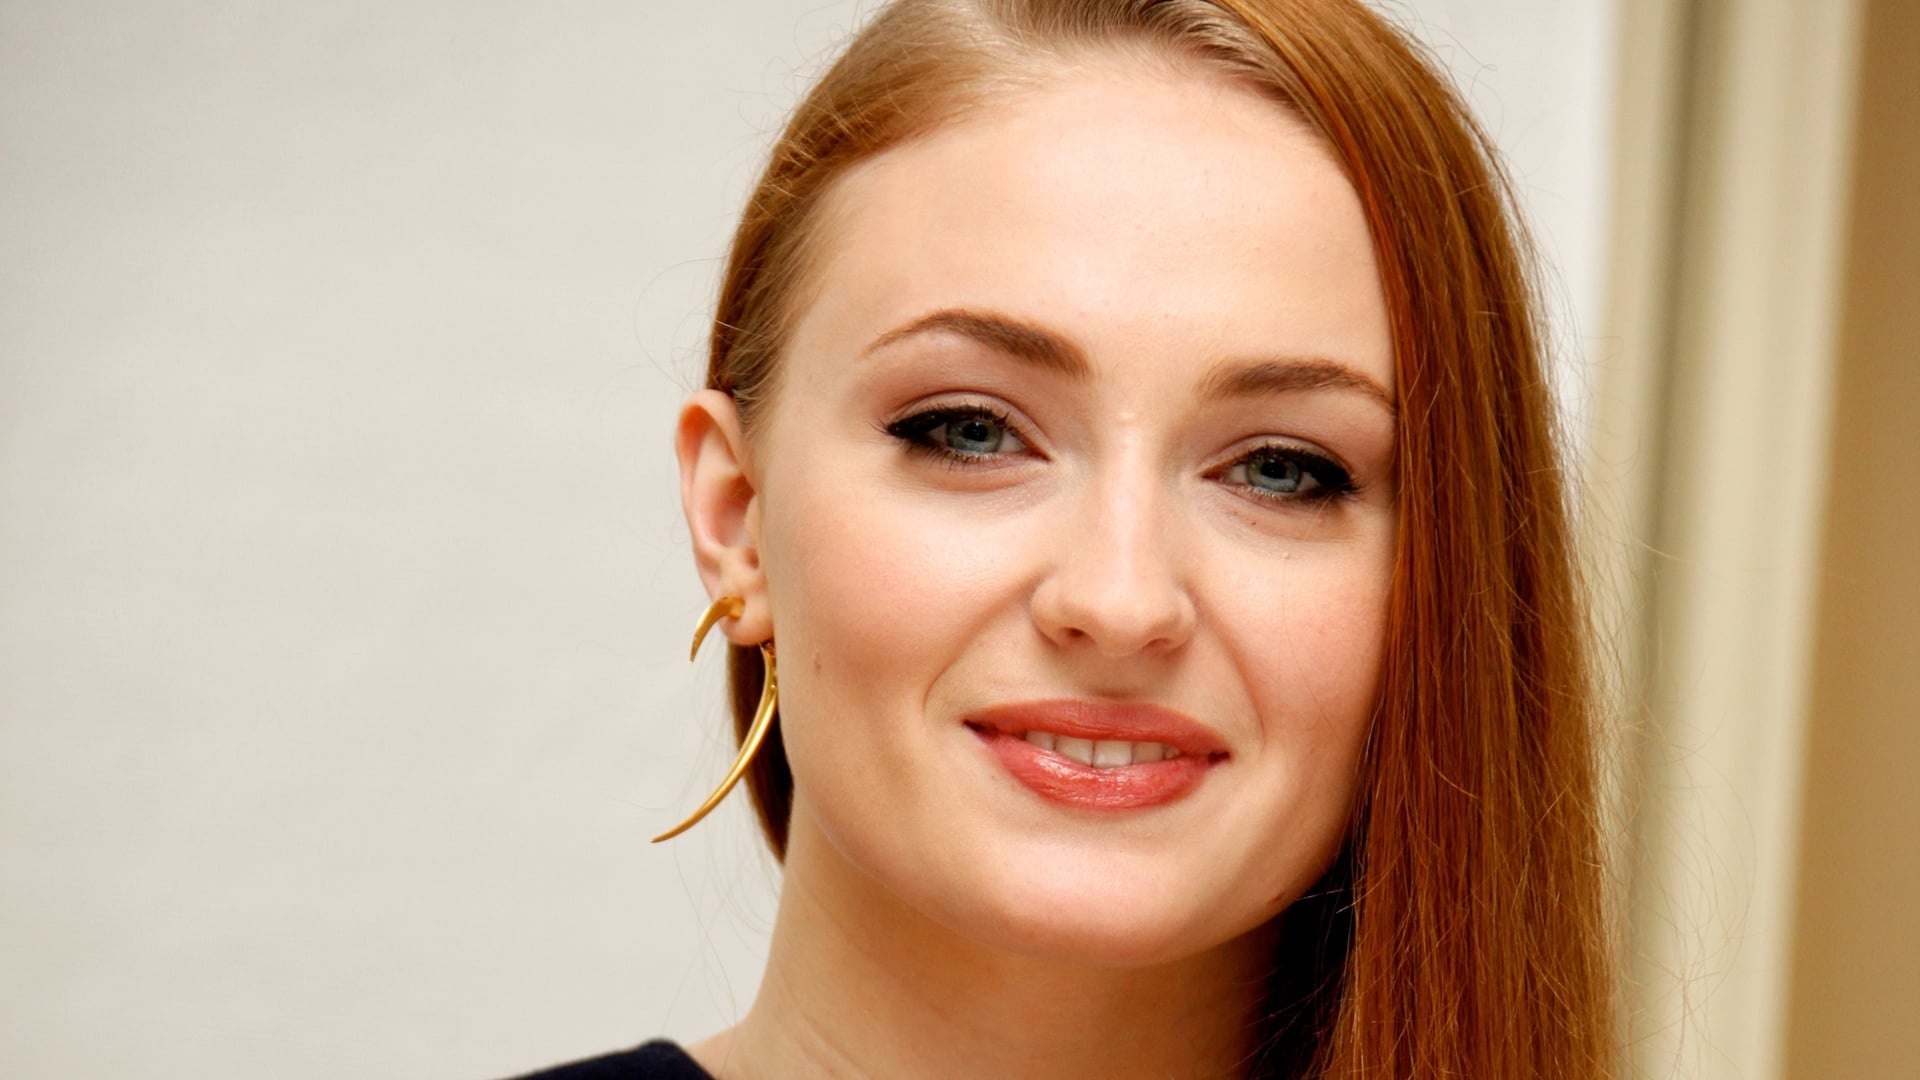 Sophie Turner: Narrated the audiobook version of the Lev Grossman short story "The Girl in the Mirror". 1920x1080 Full HD Wallpaper.